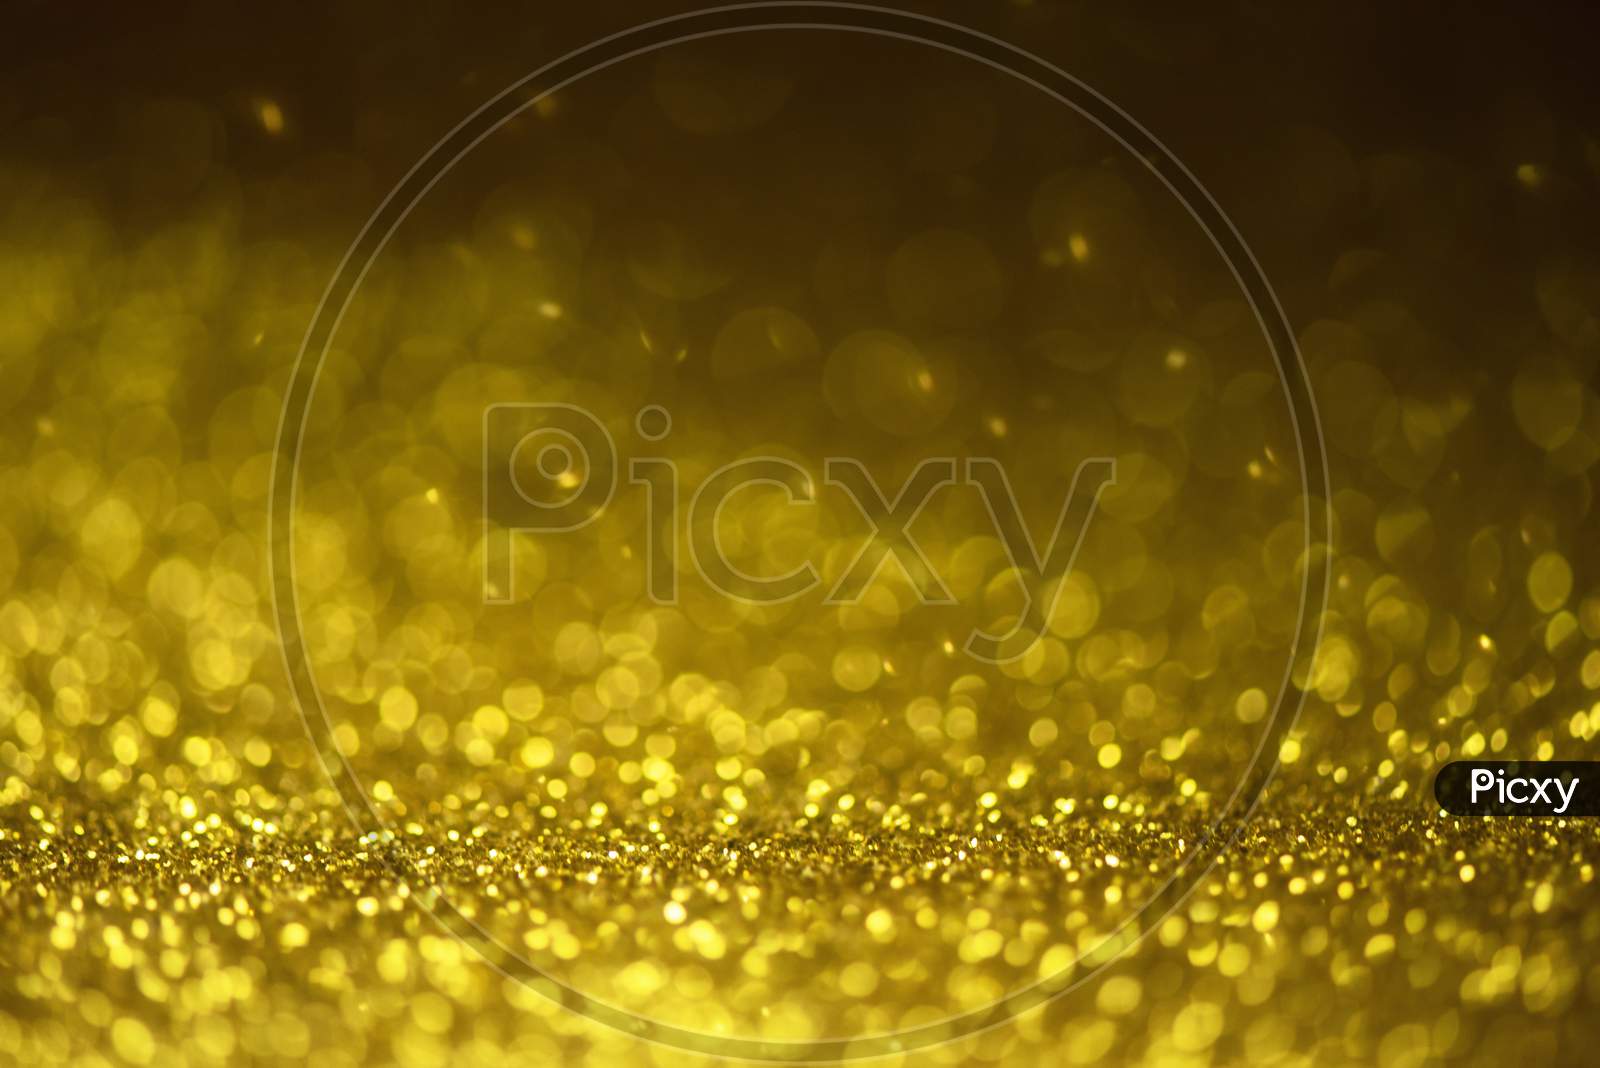 Gold Glitter Sparkle Lights Background. Defocused Glitter Abstract Twinkly Light And Shiny Stars. Christmas And New Year Party Concept Background. Closeup Stardust.